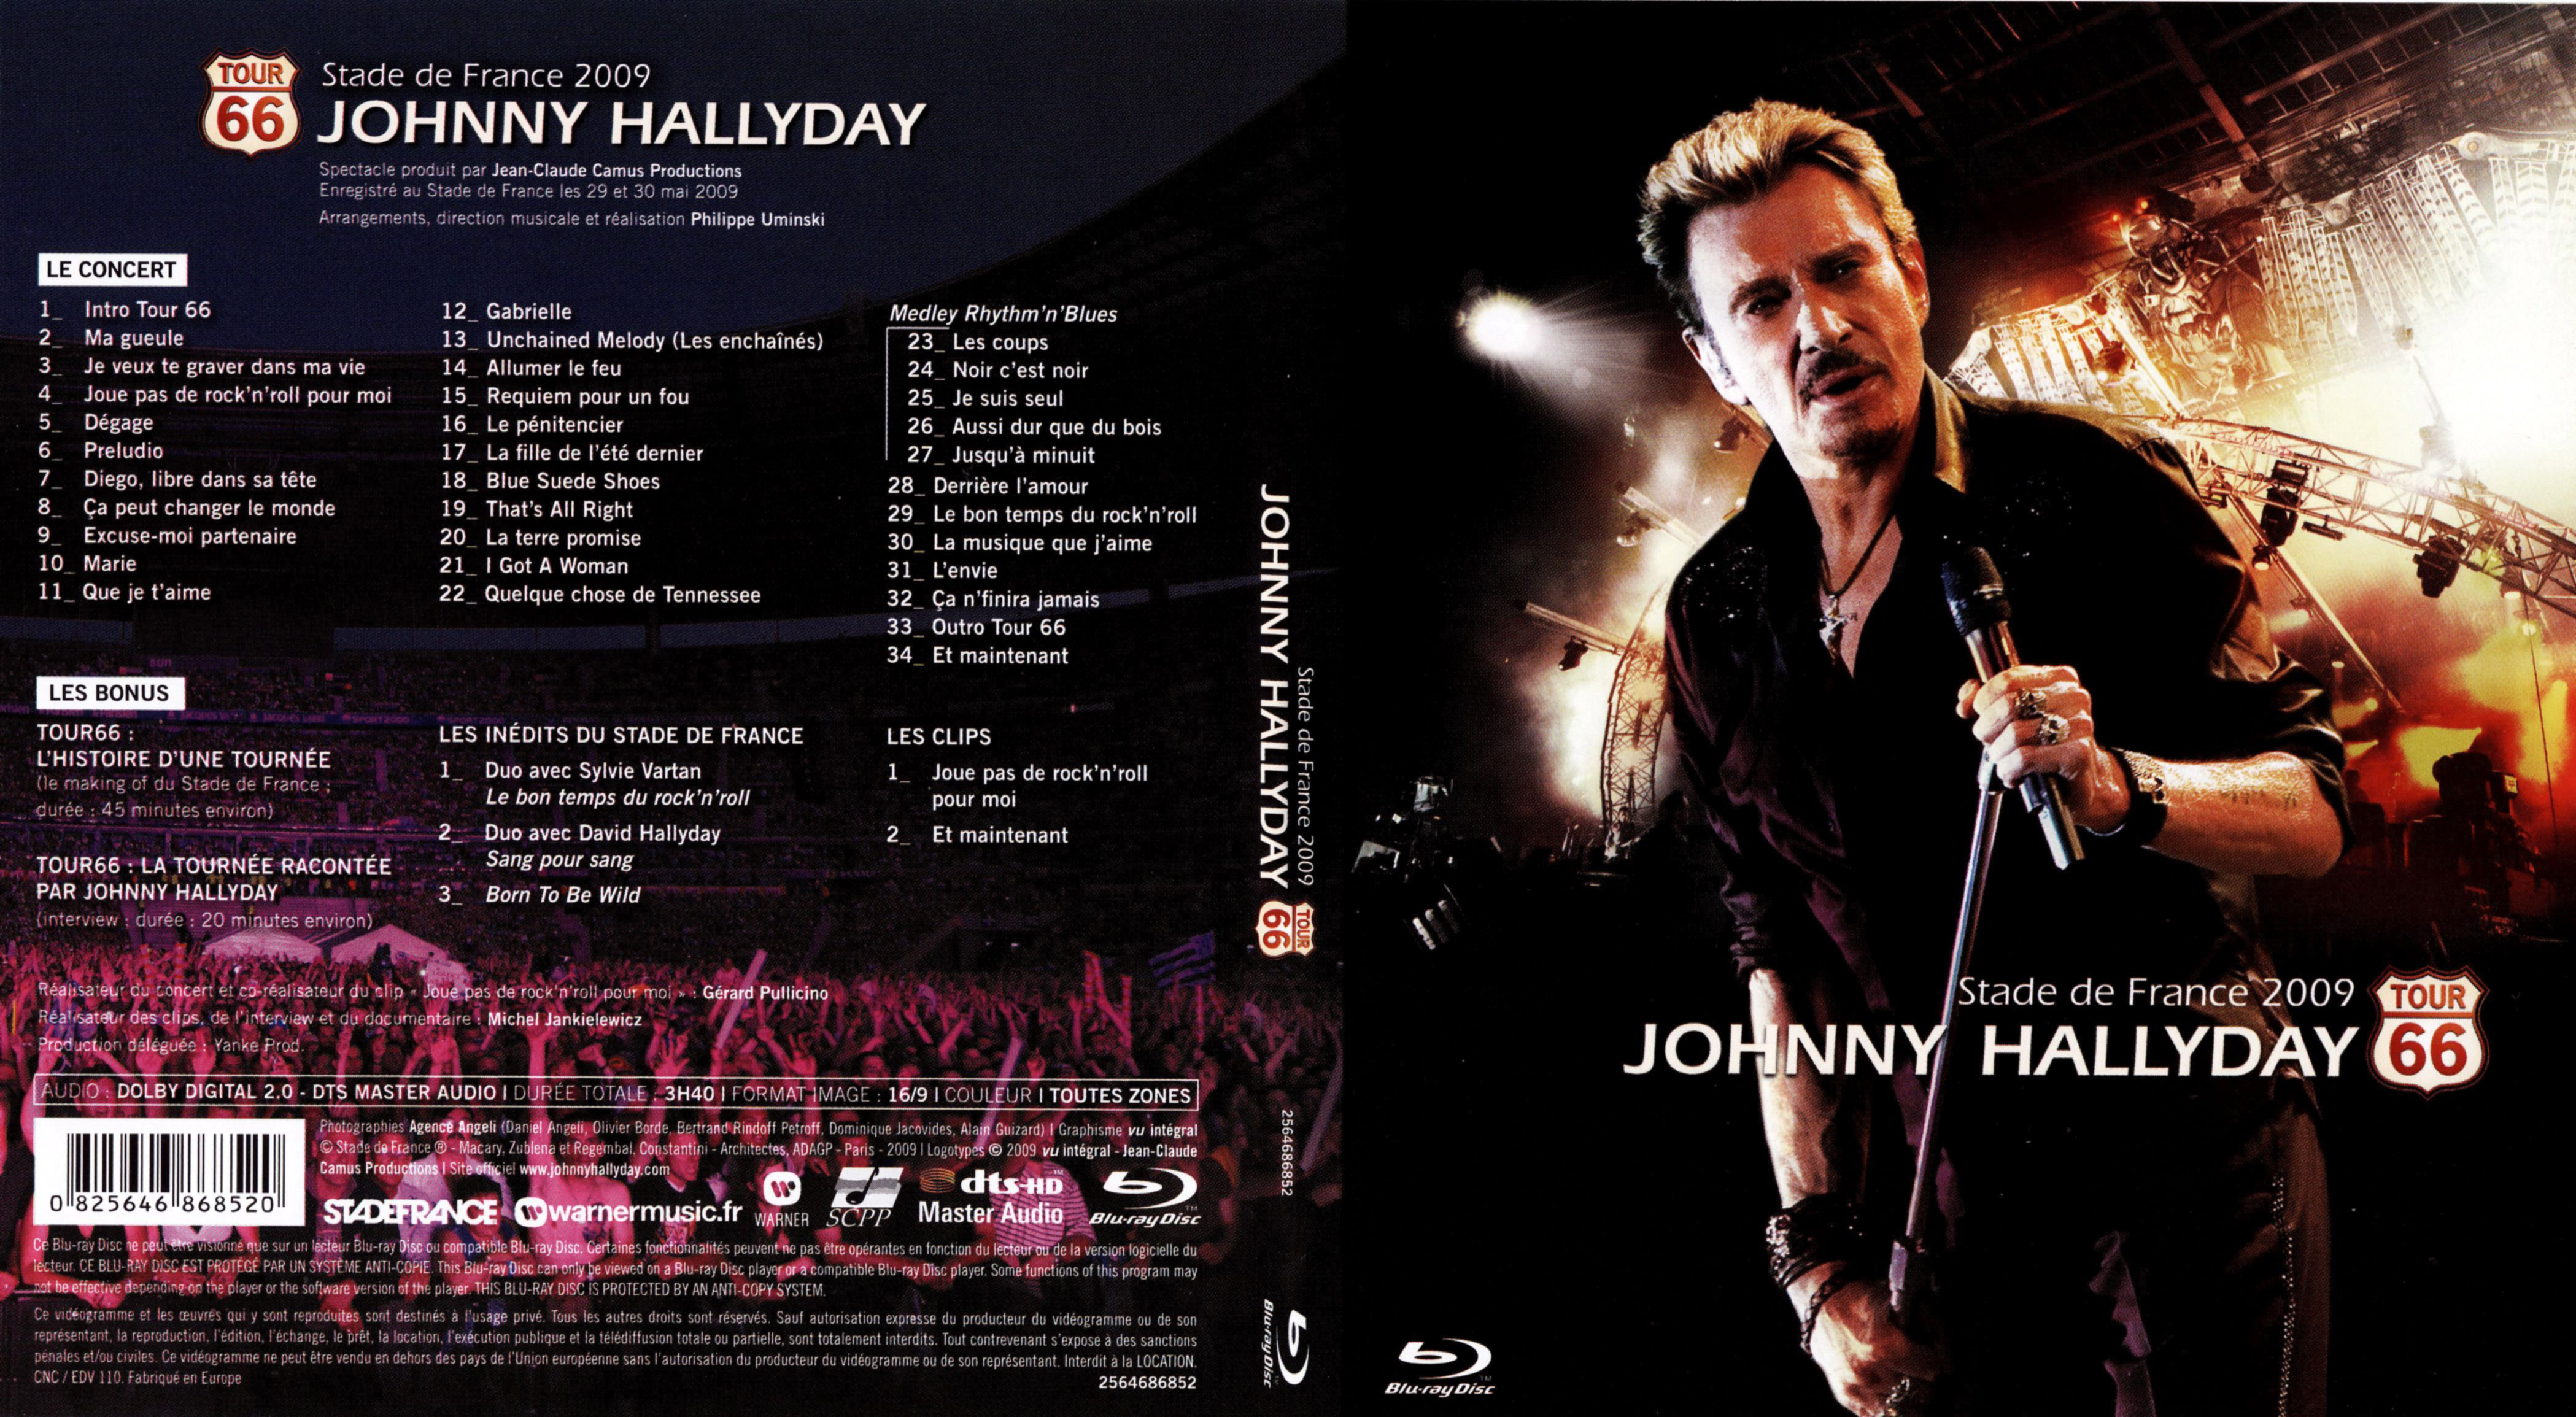 Jaquette DVD Johnny Hallyday Route 66 stade de France 2009 (BLU-RAY)